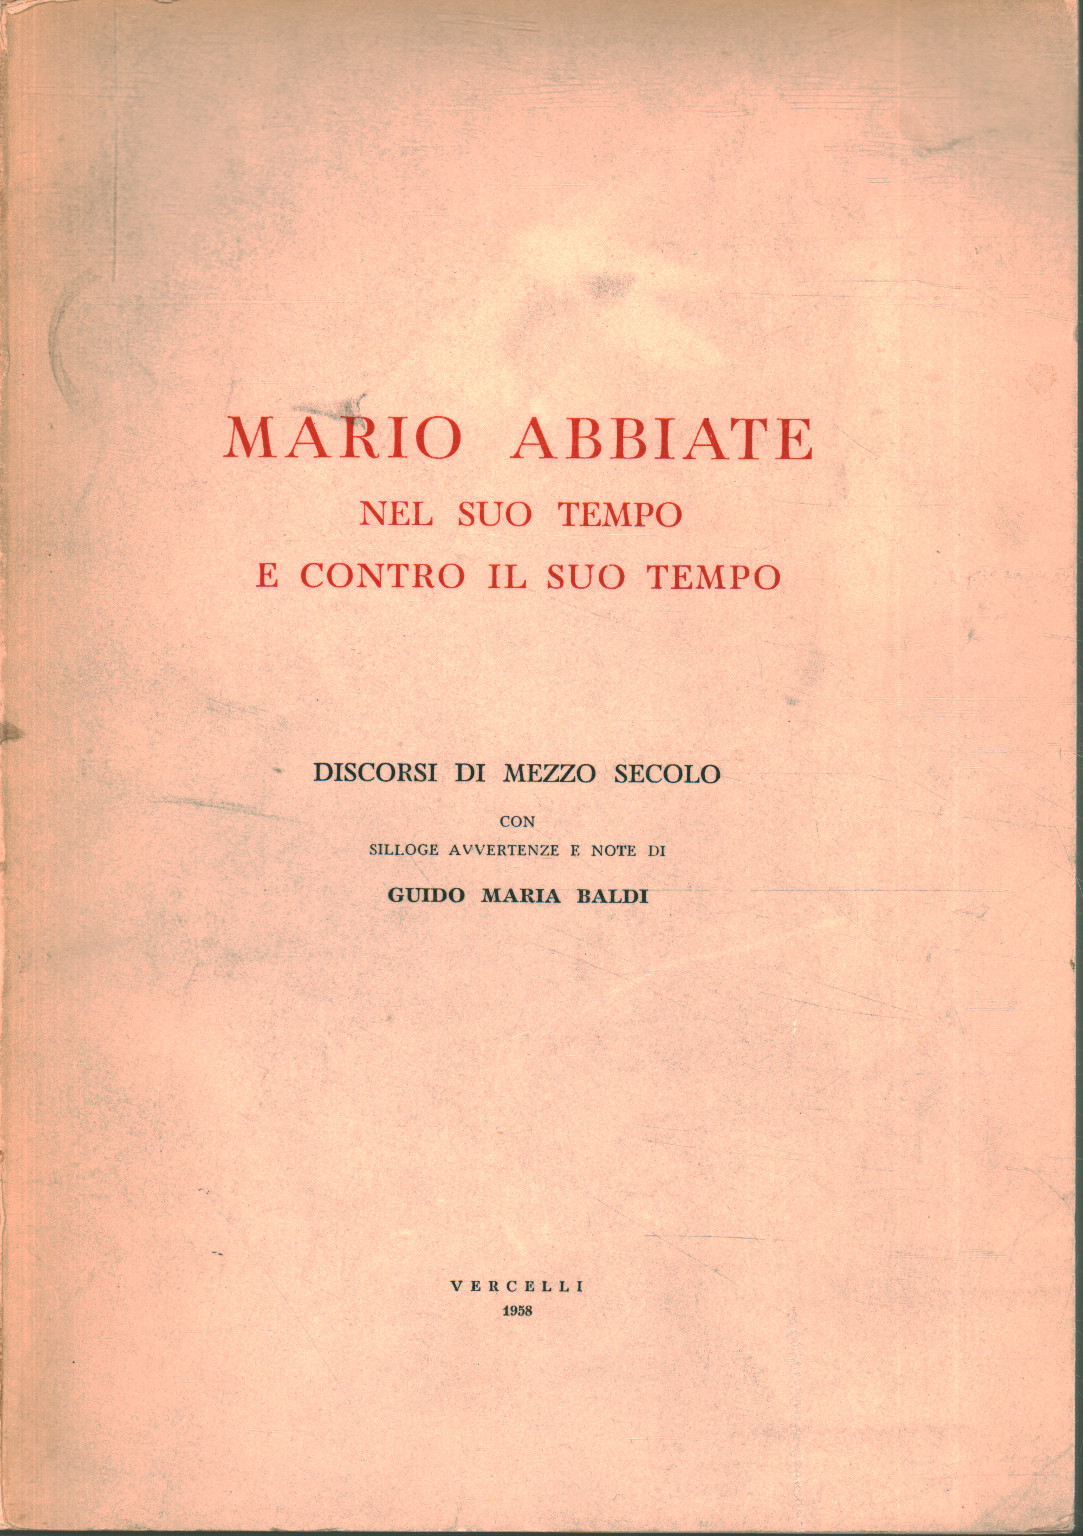 Mario Abbiate in his time and against his time, Guido Maria Baldi